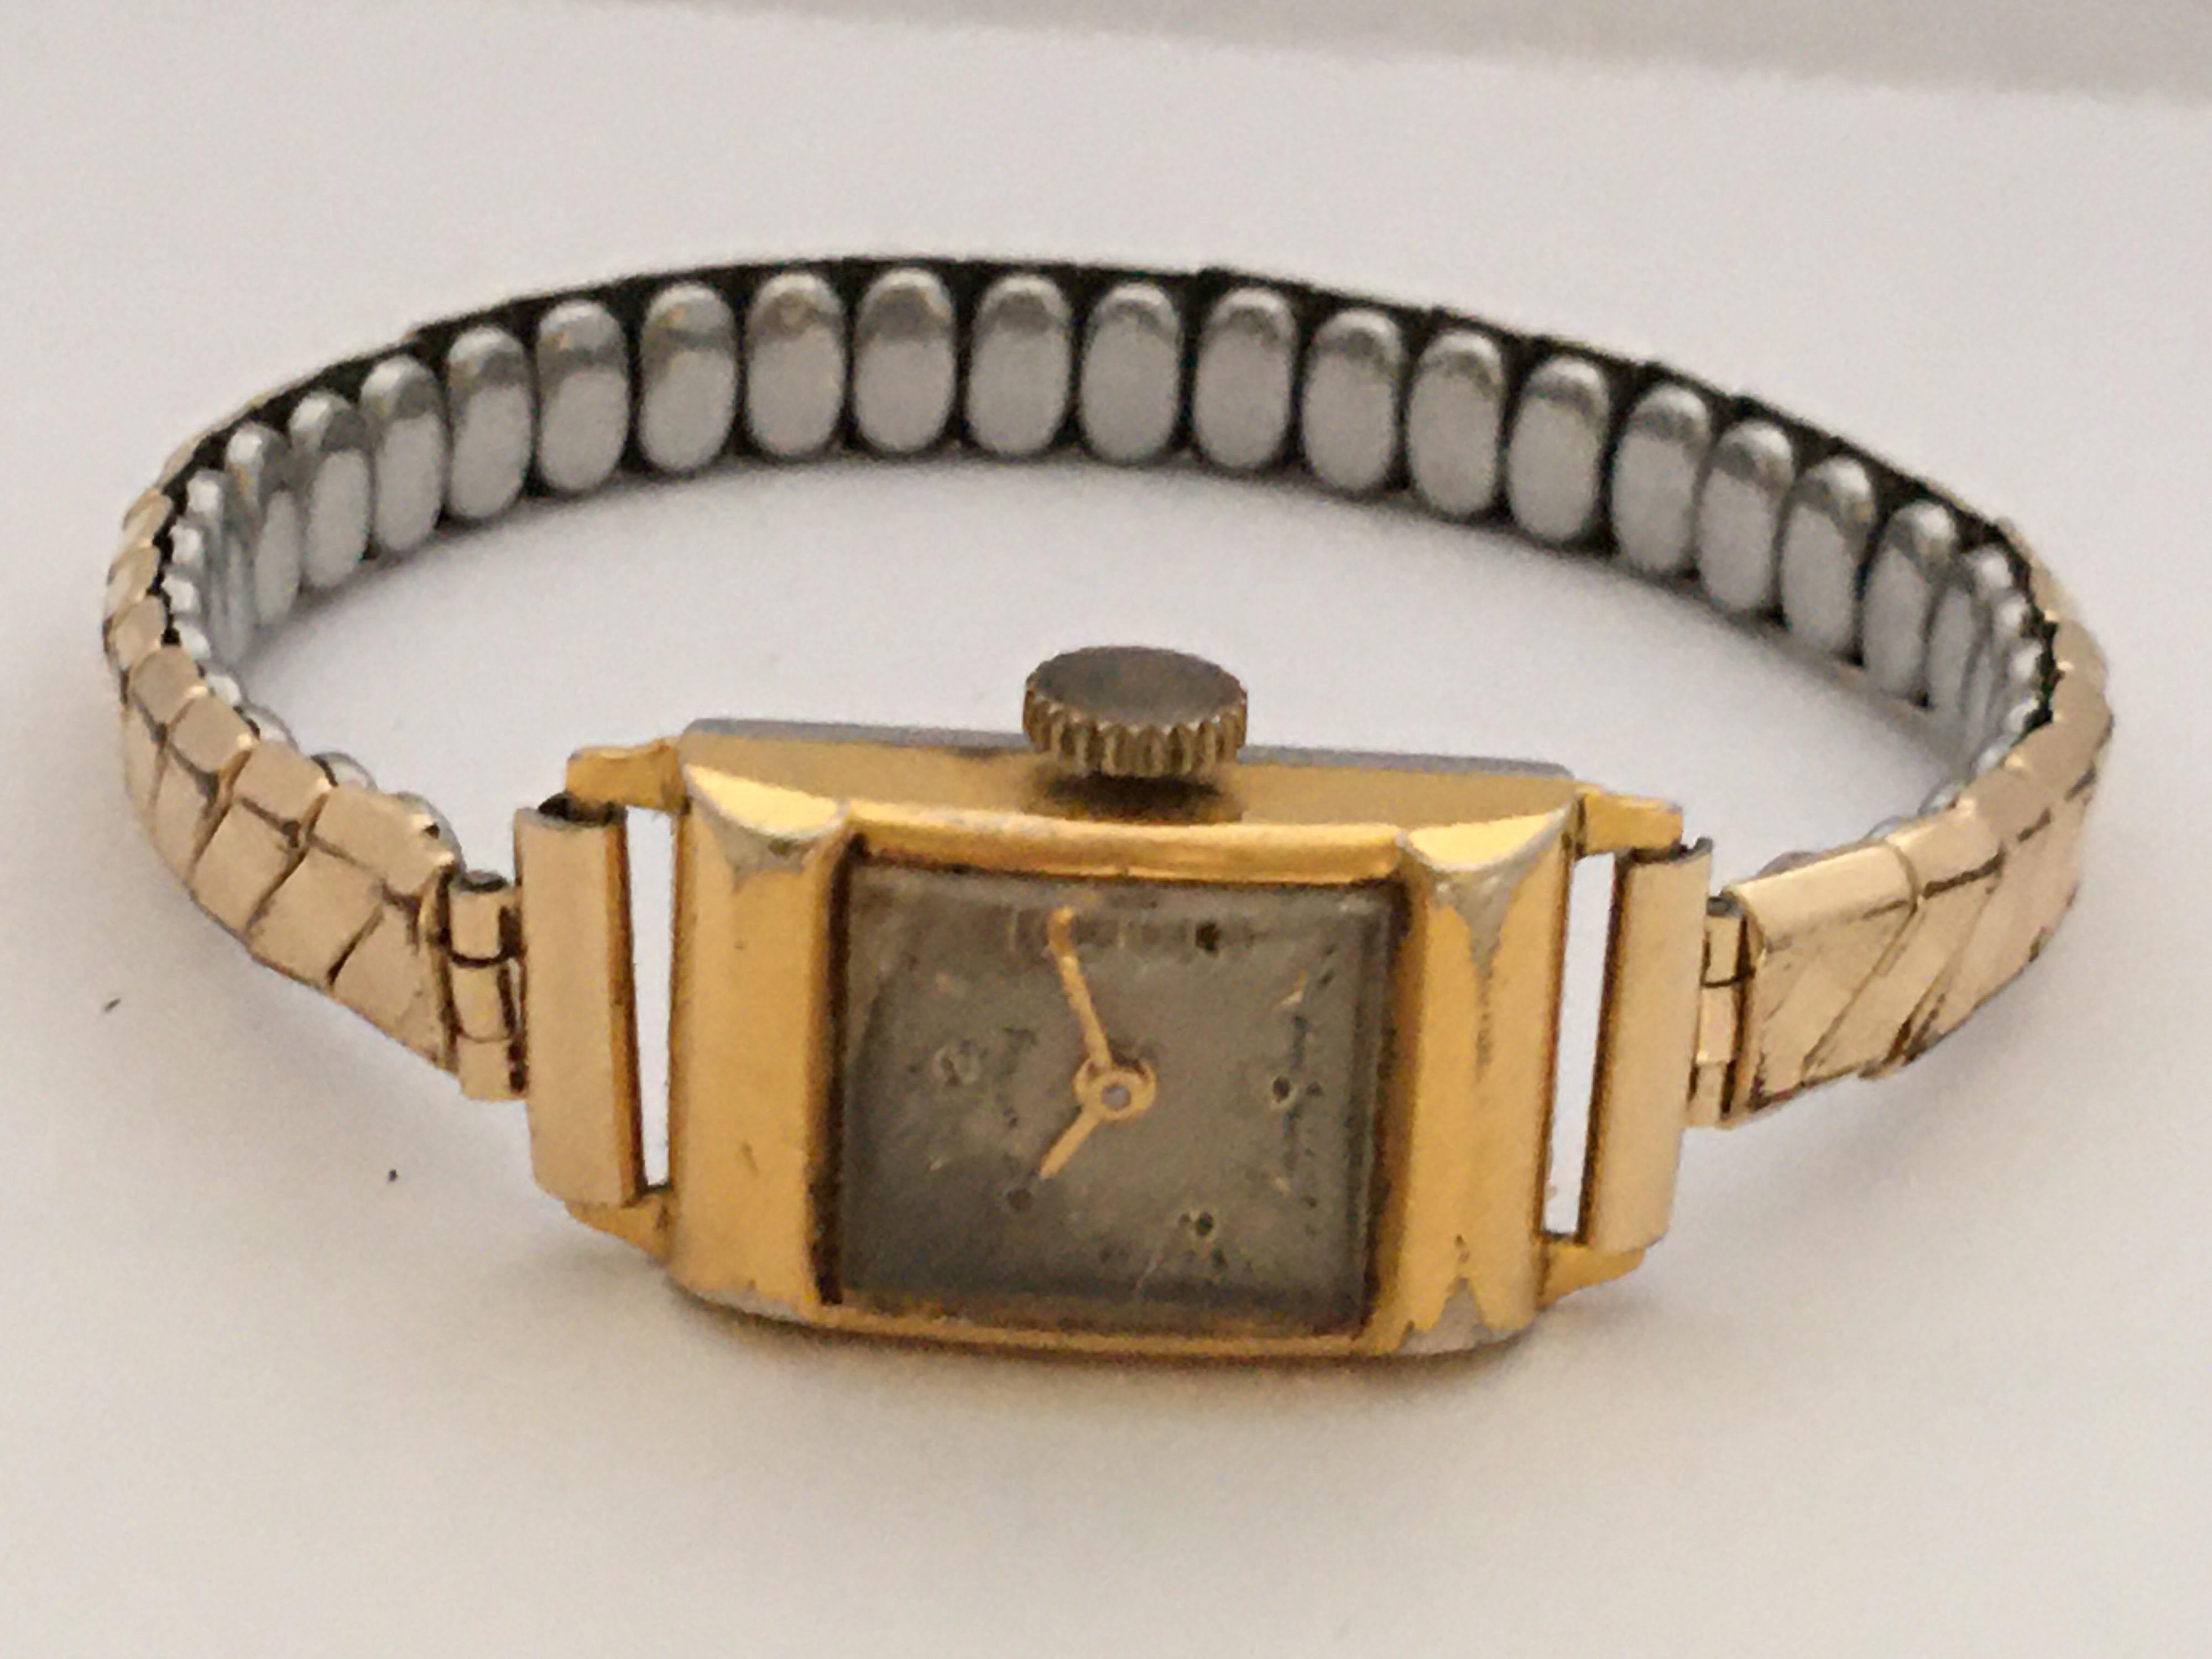 Vintage 1970s Gold-Plated Services Ladies Mechanical Watch In Fair Condition For Sale In Carlisle, GB